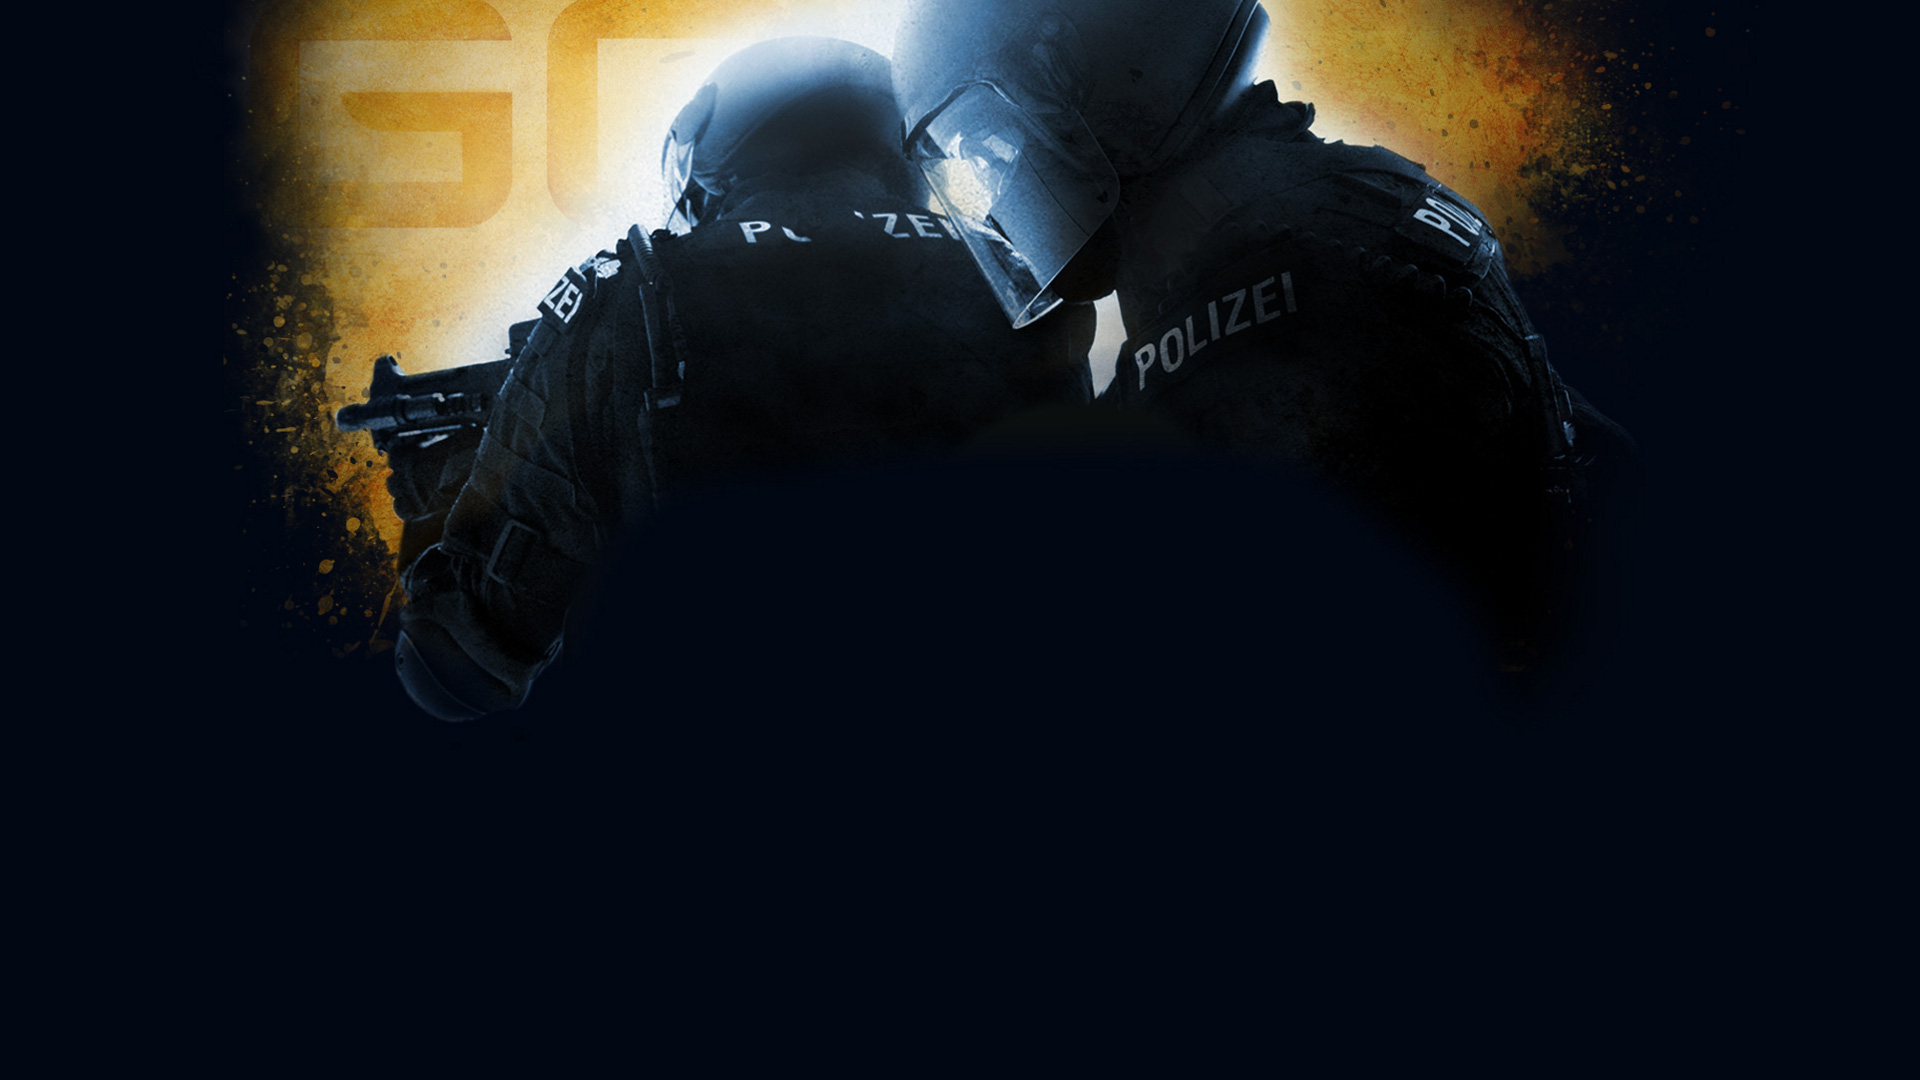 Video Game Counter-Strike: Global Offensive HD Wallpaper by Listenshow